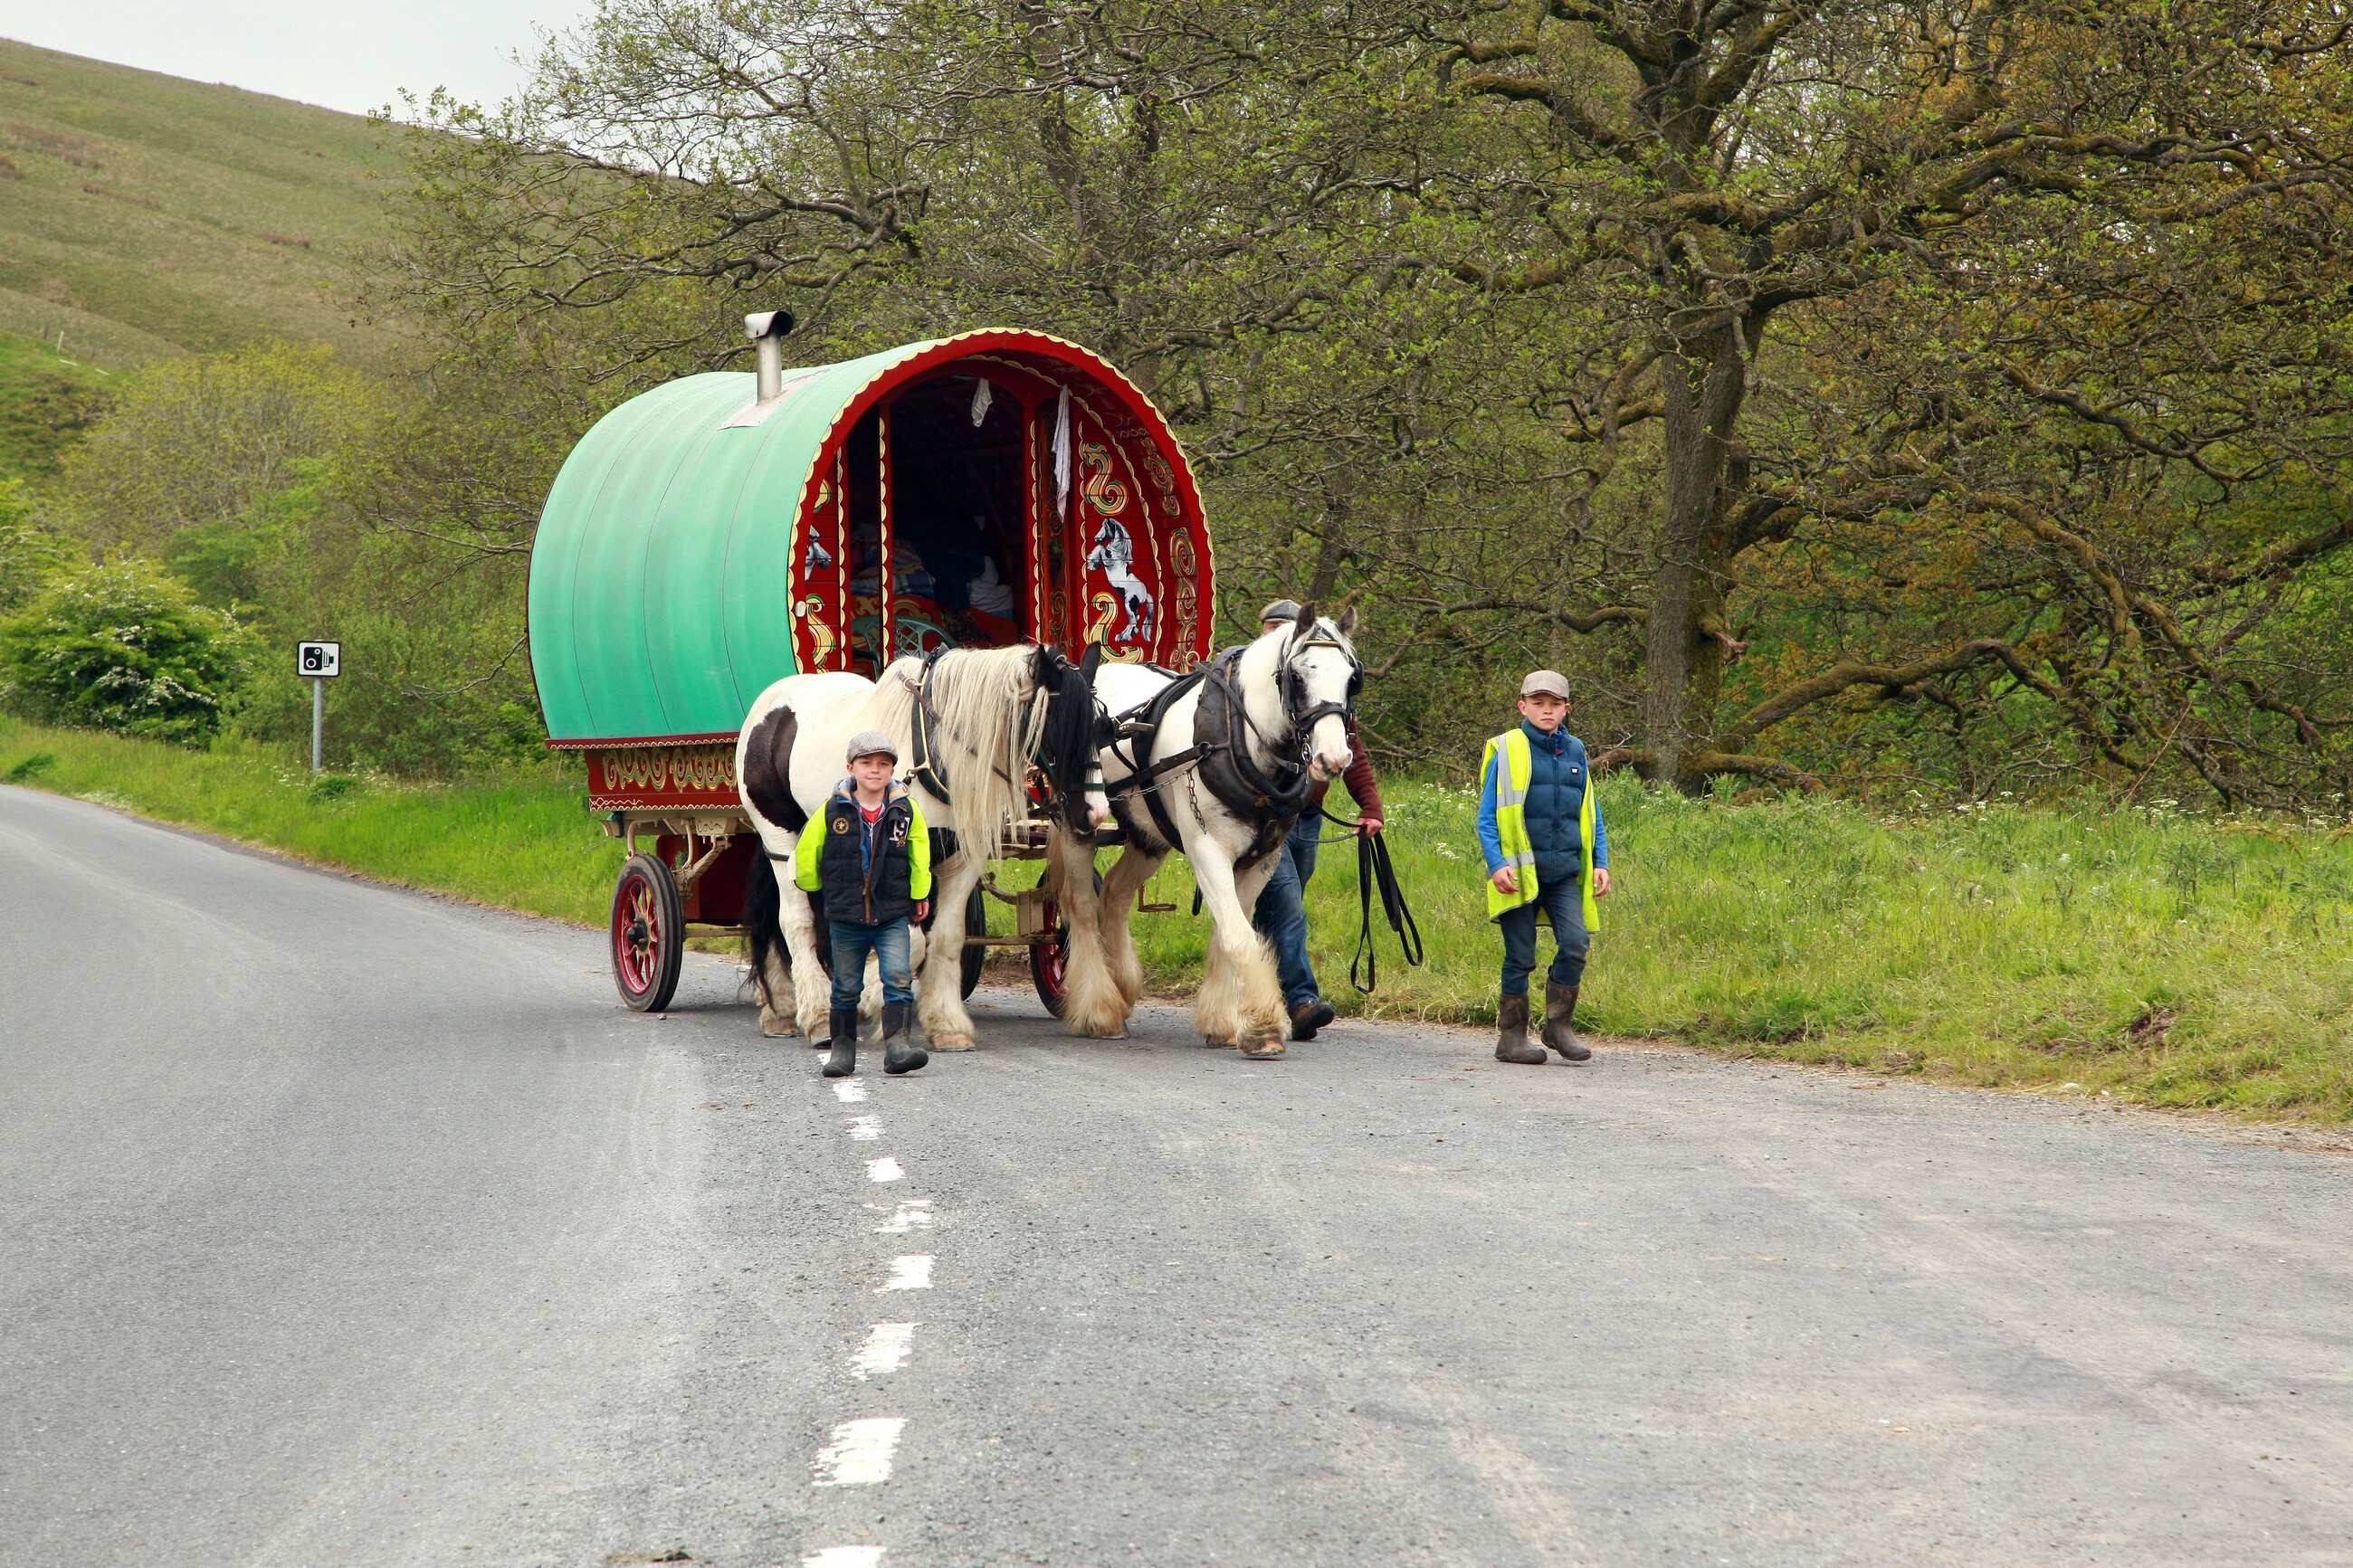 gypsy and traveller law